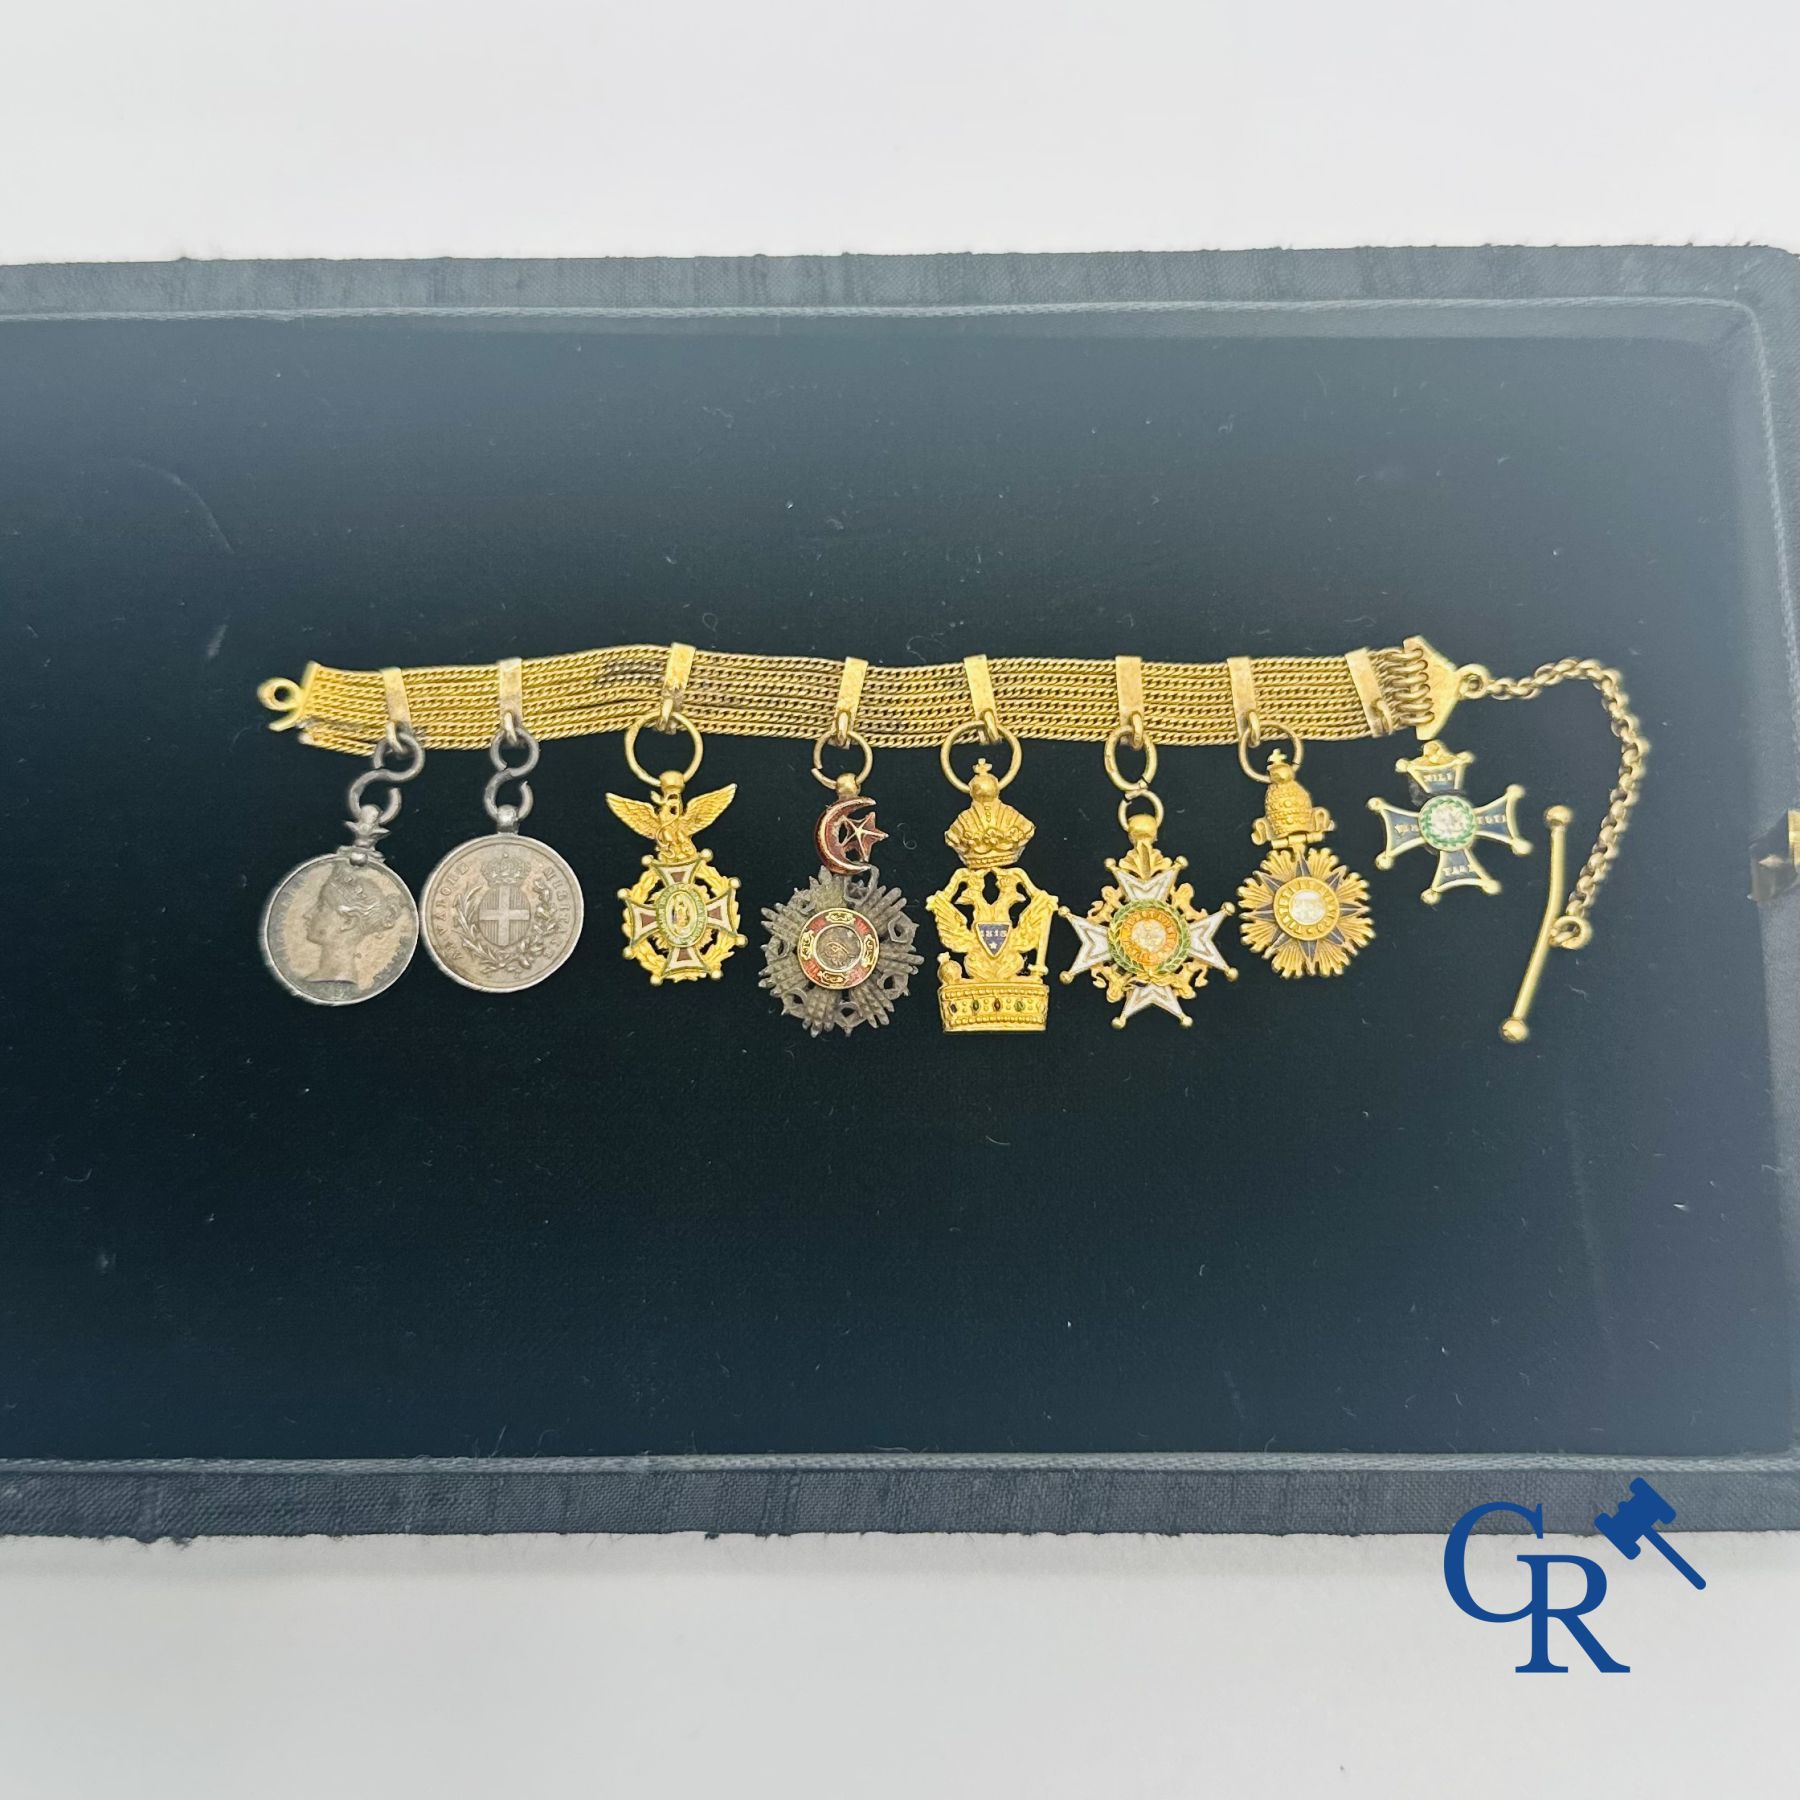 Medals - Order of the Crown Honorary Marks - Decorations: Miniature chain in gold 18K with various decorations in reduction.